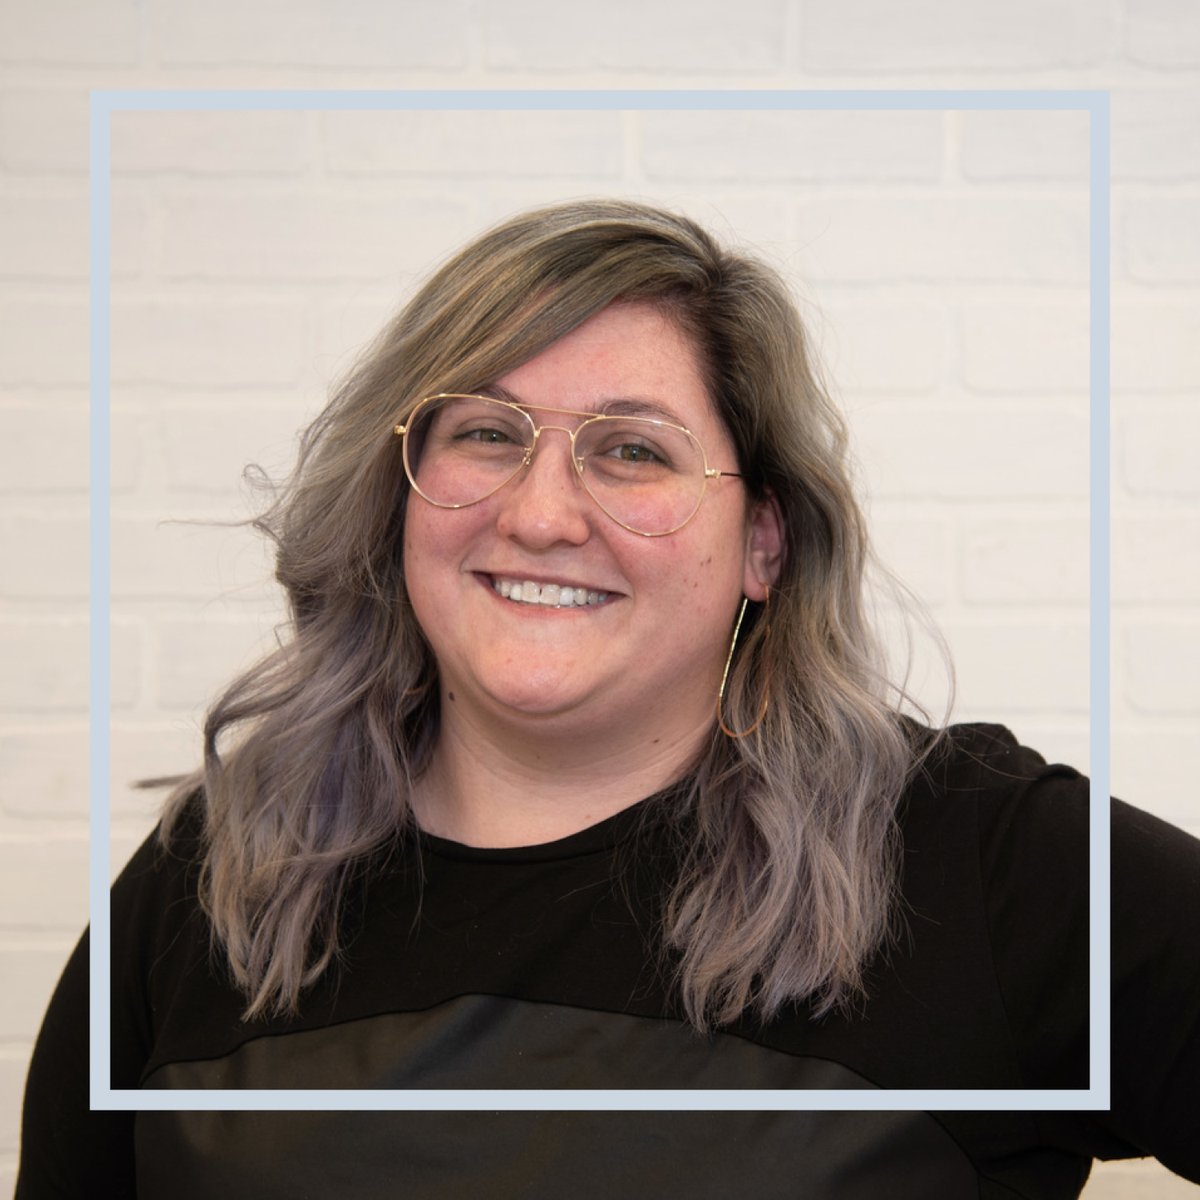 If you need more tech in your Tuesday, check out our Design Technology Manager, Jess Purcell, who was recently featured on the BIM Thoughts Podcast, available wherever you get your podcasts! bimthoughts.com/e2101/ #techtuesday #architecture #technology #BIM